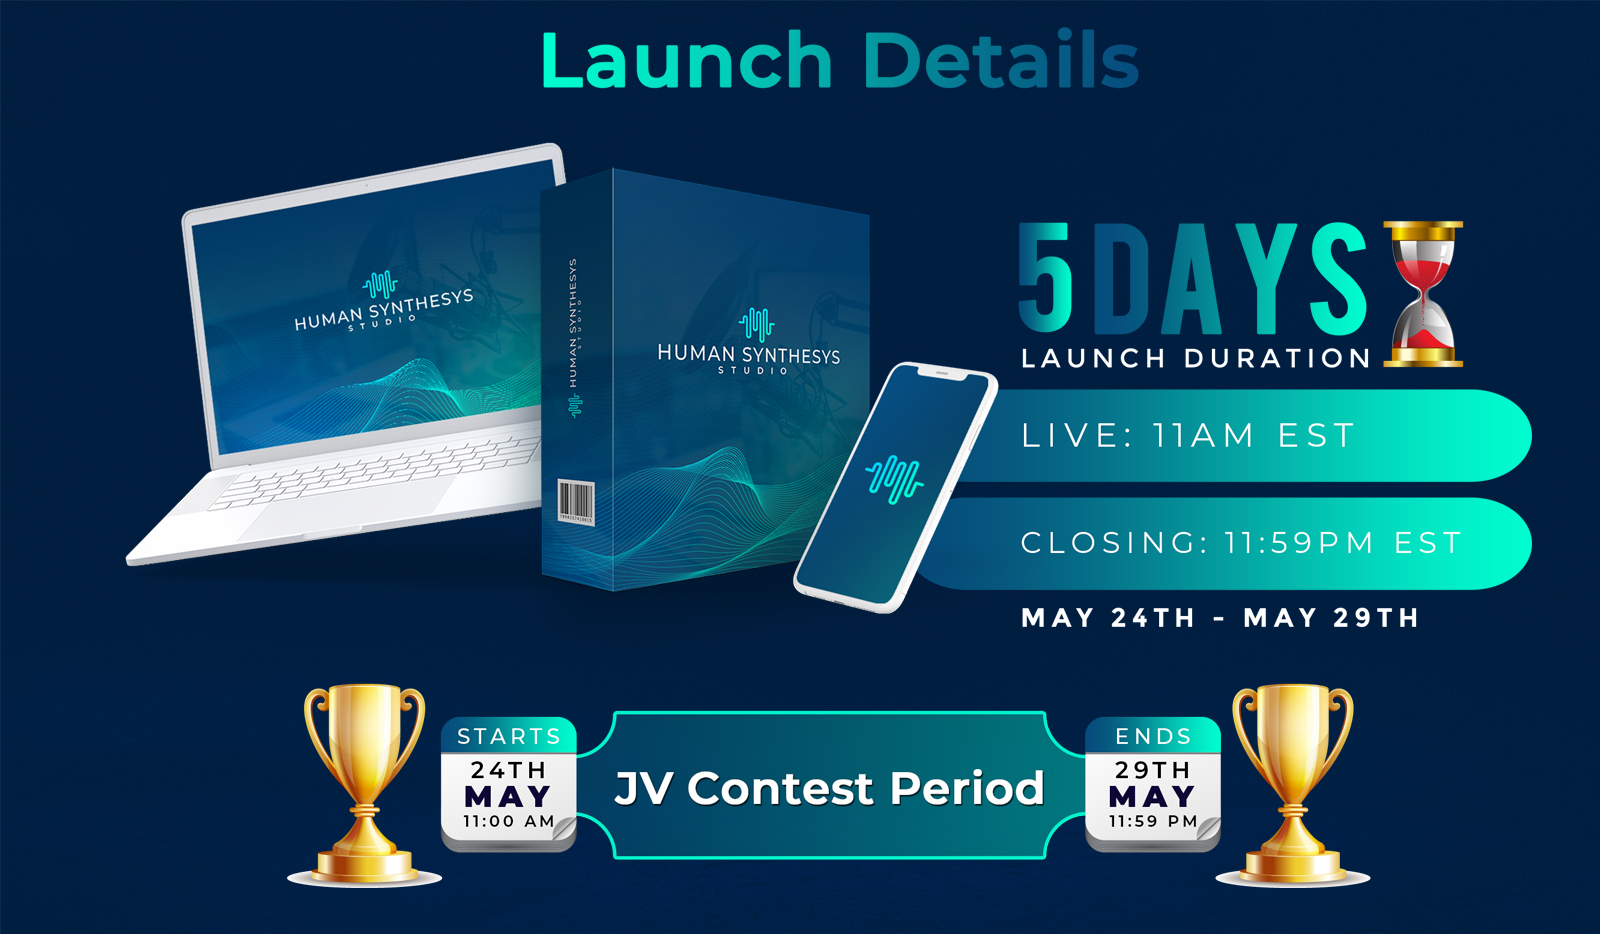 JOIN US FOR THE MASSIVE LAUNCH 